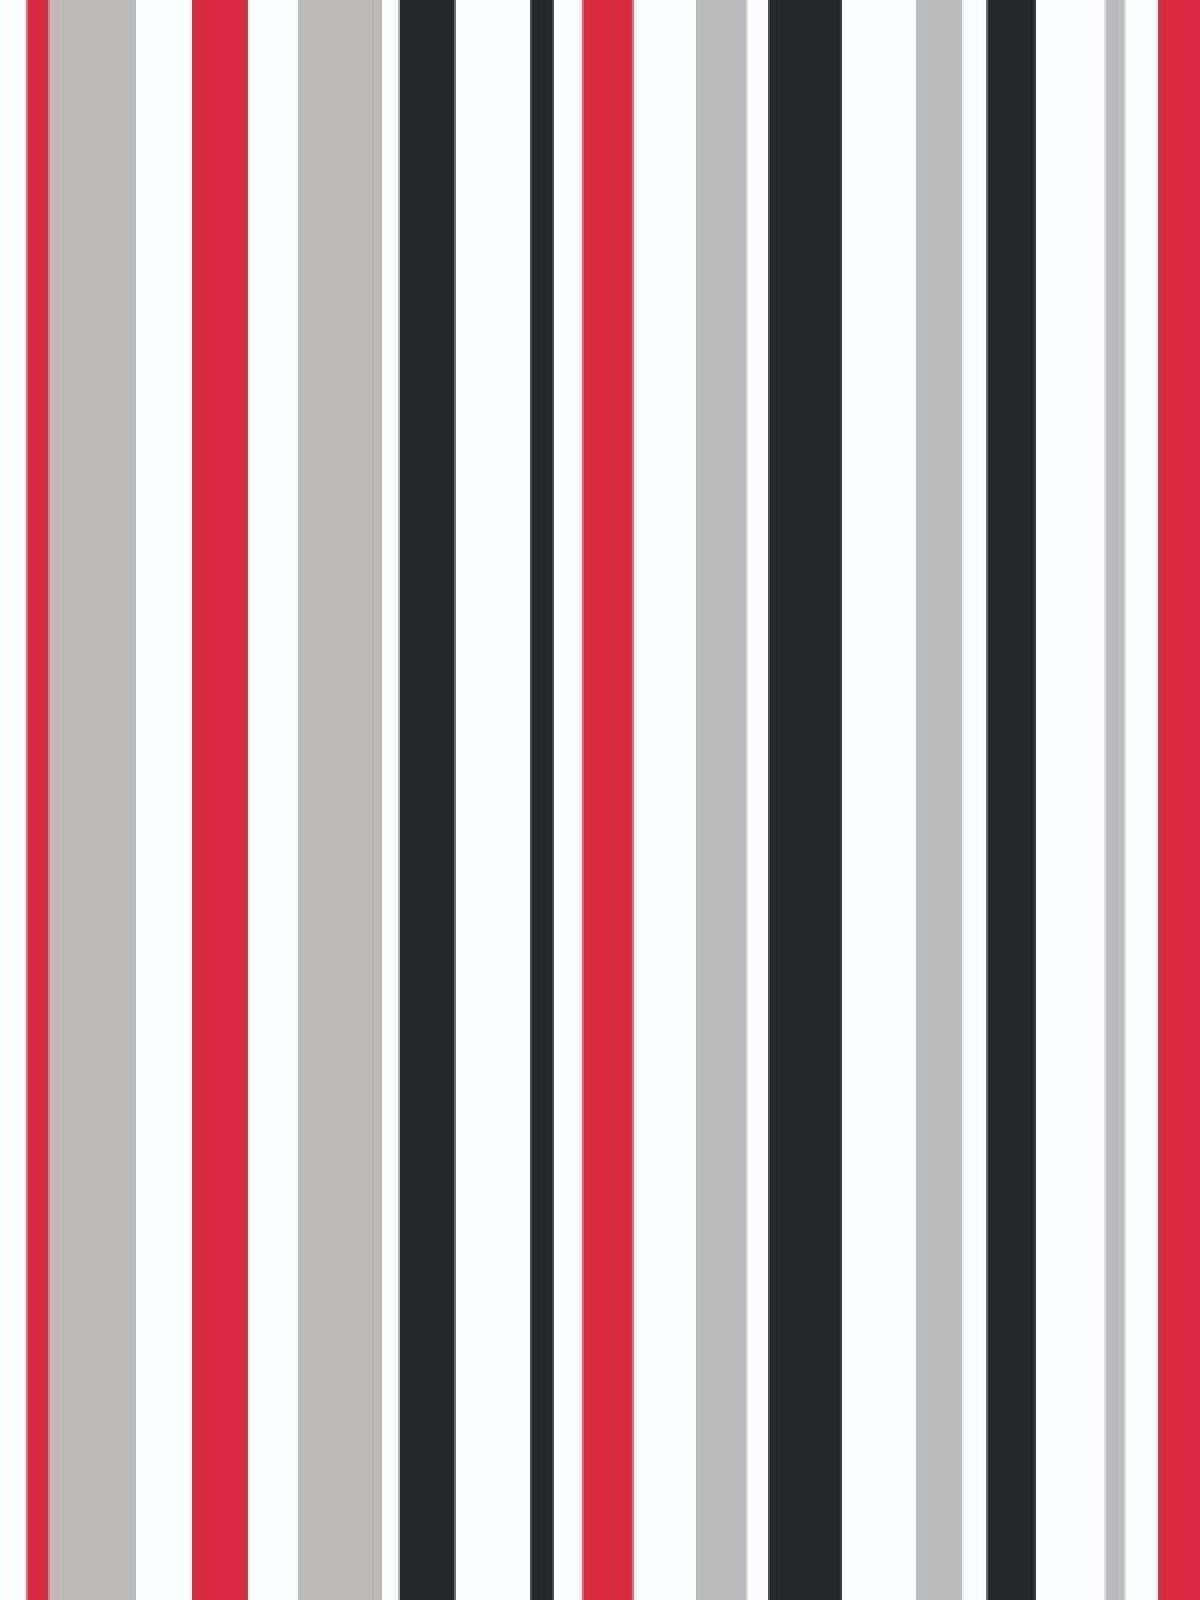 Download Red, White and Black Abstract Wallpaper | Wallpapers.com